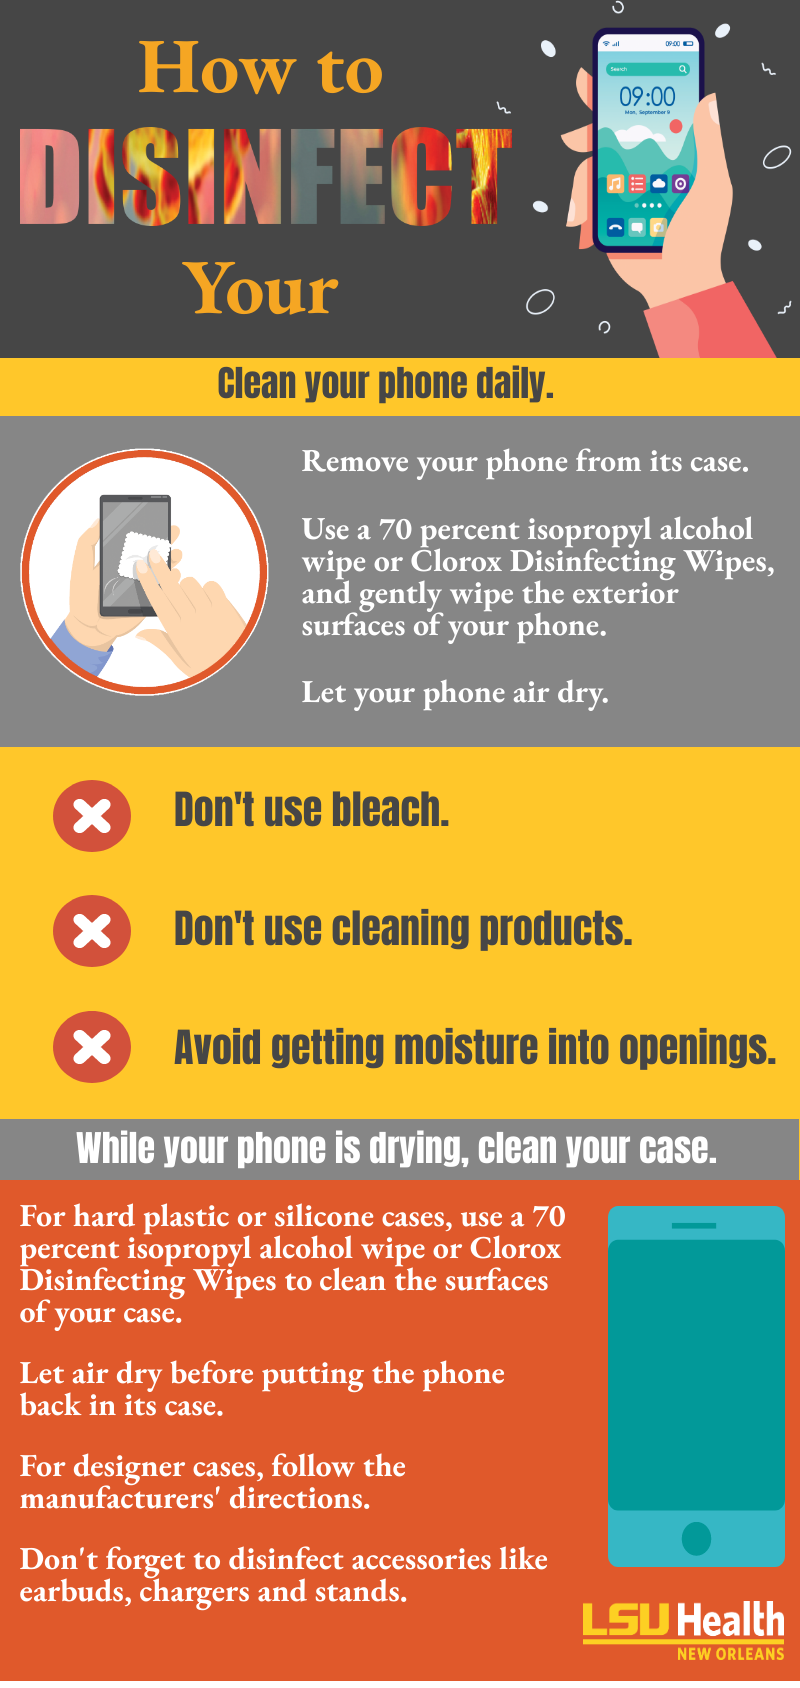 tips to dinfect your cellphone